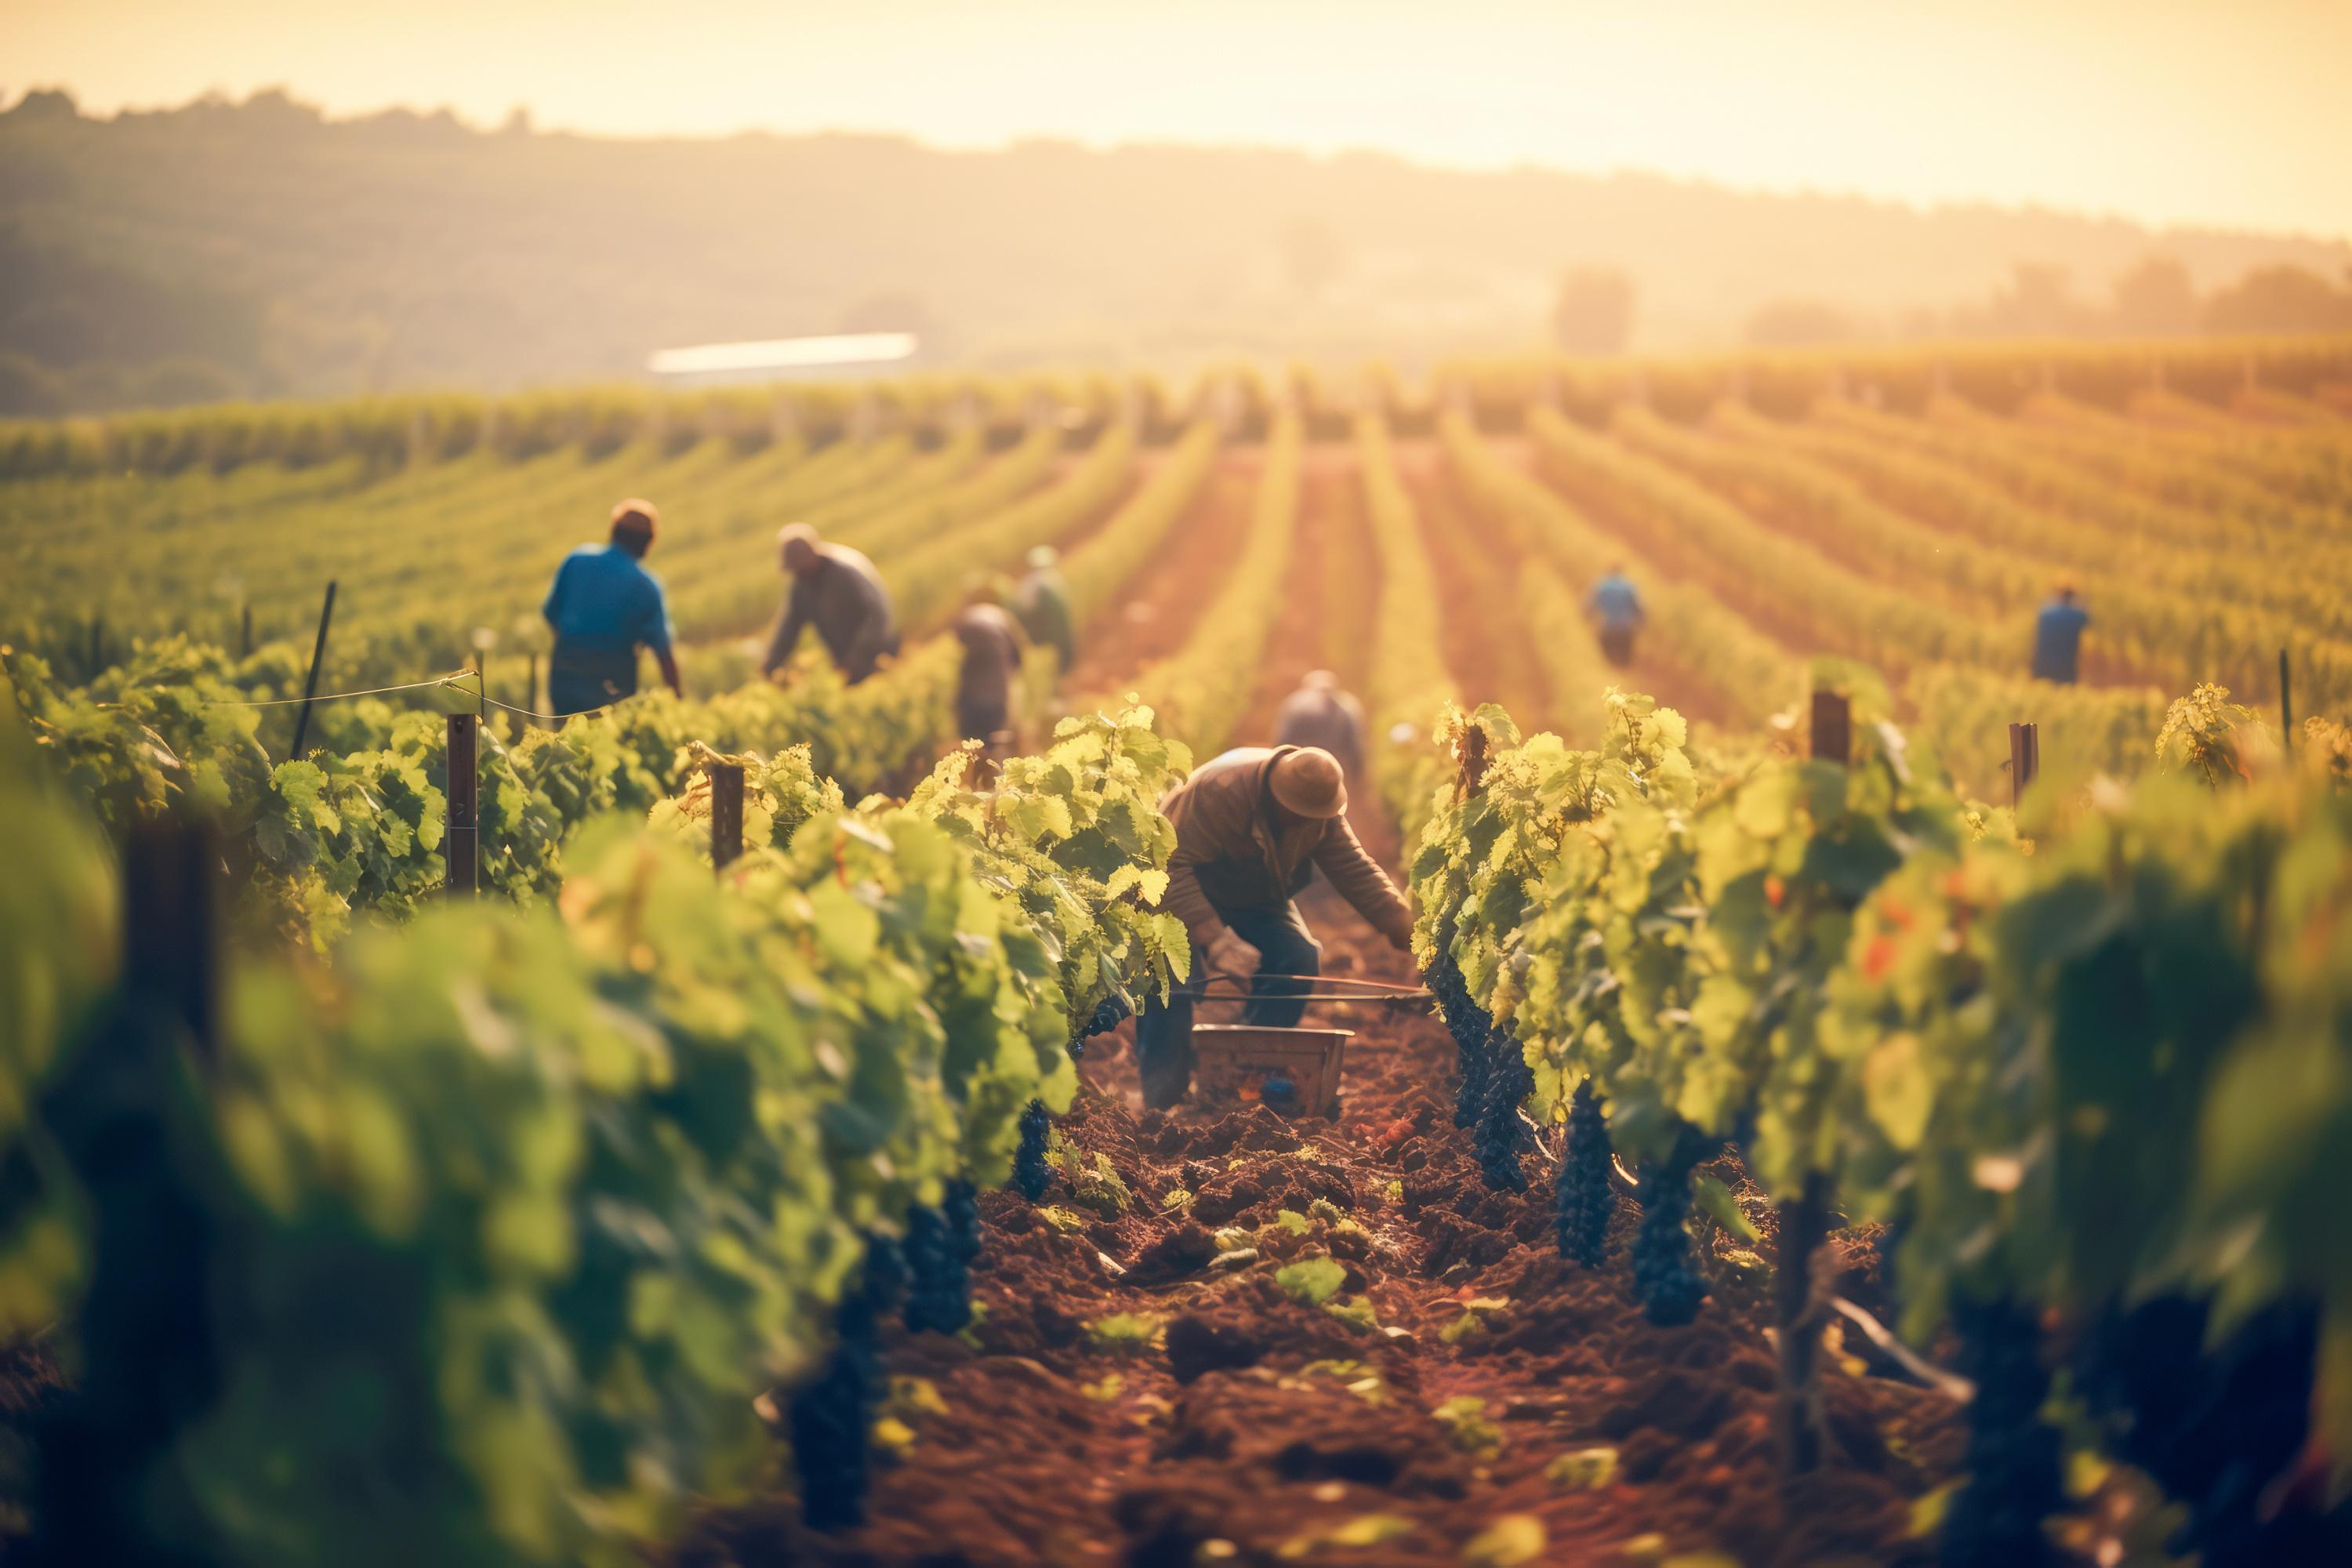 Wine growers, cattle breeders, market gardeners... Which agricultural sectors are most in difficulty?